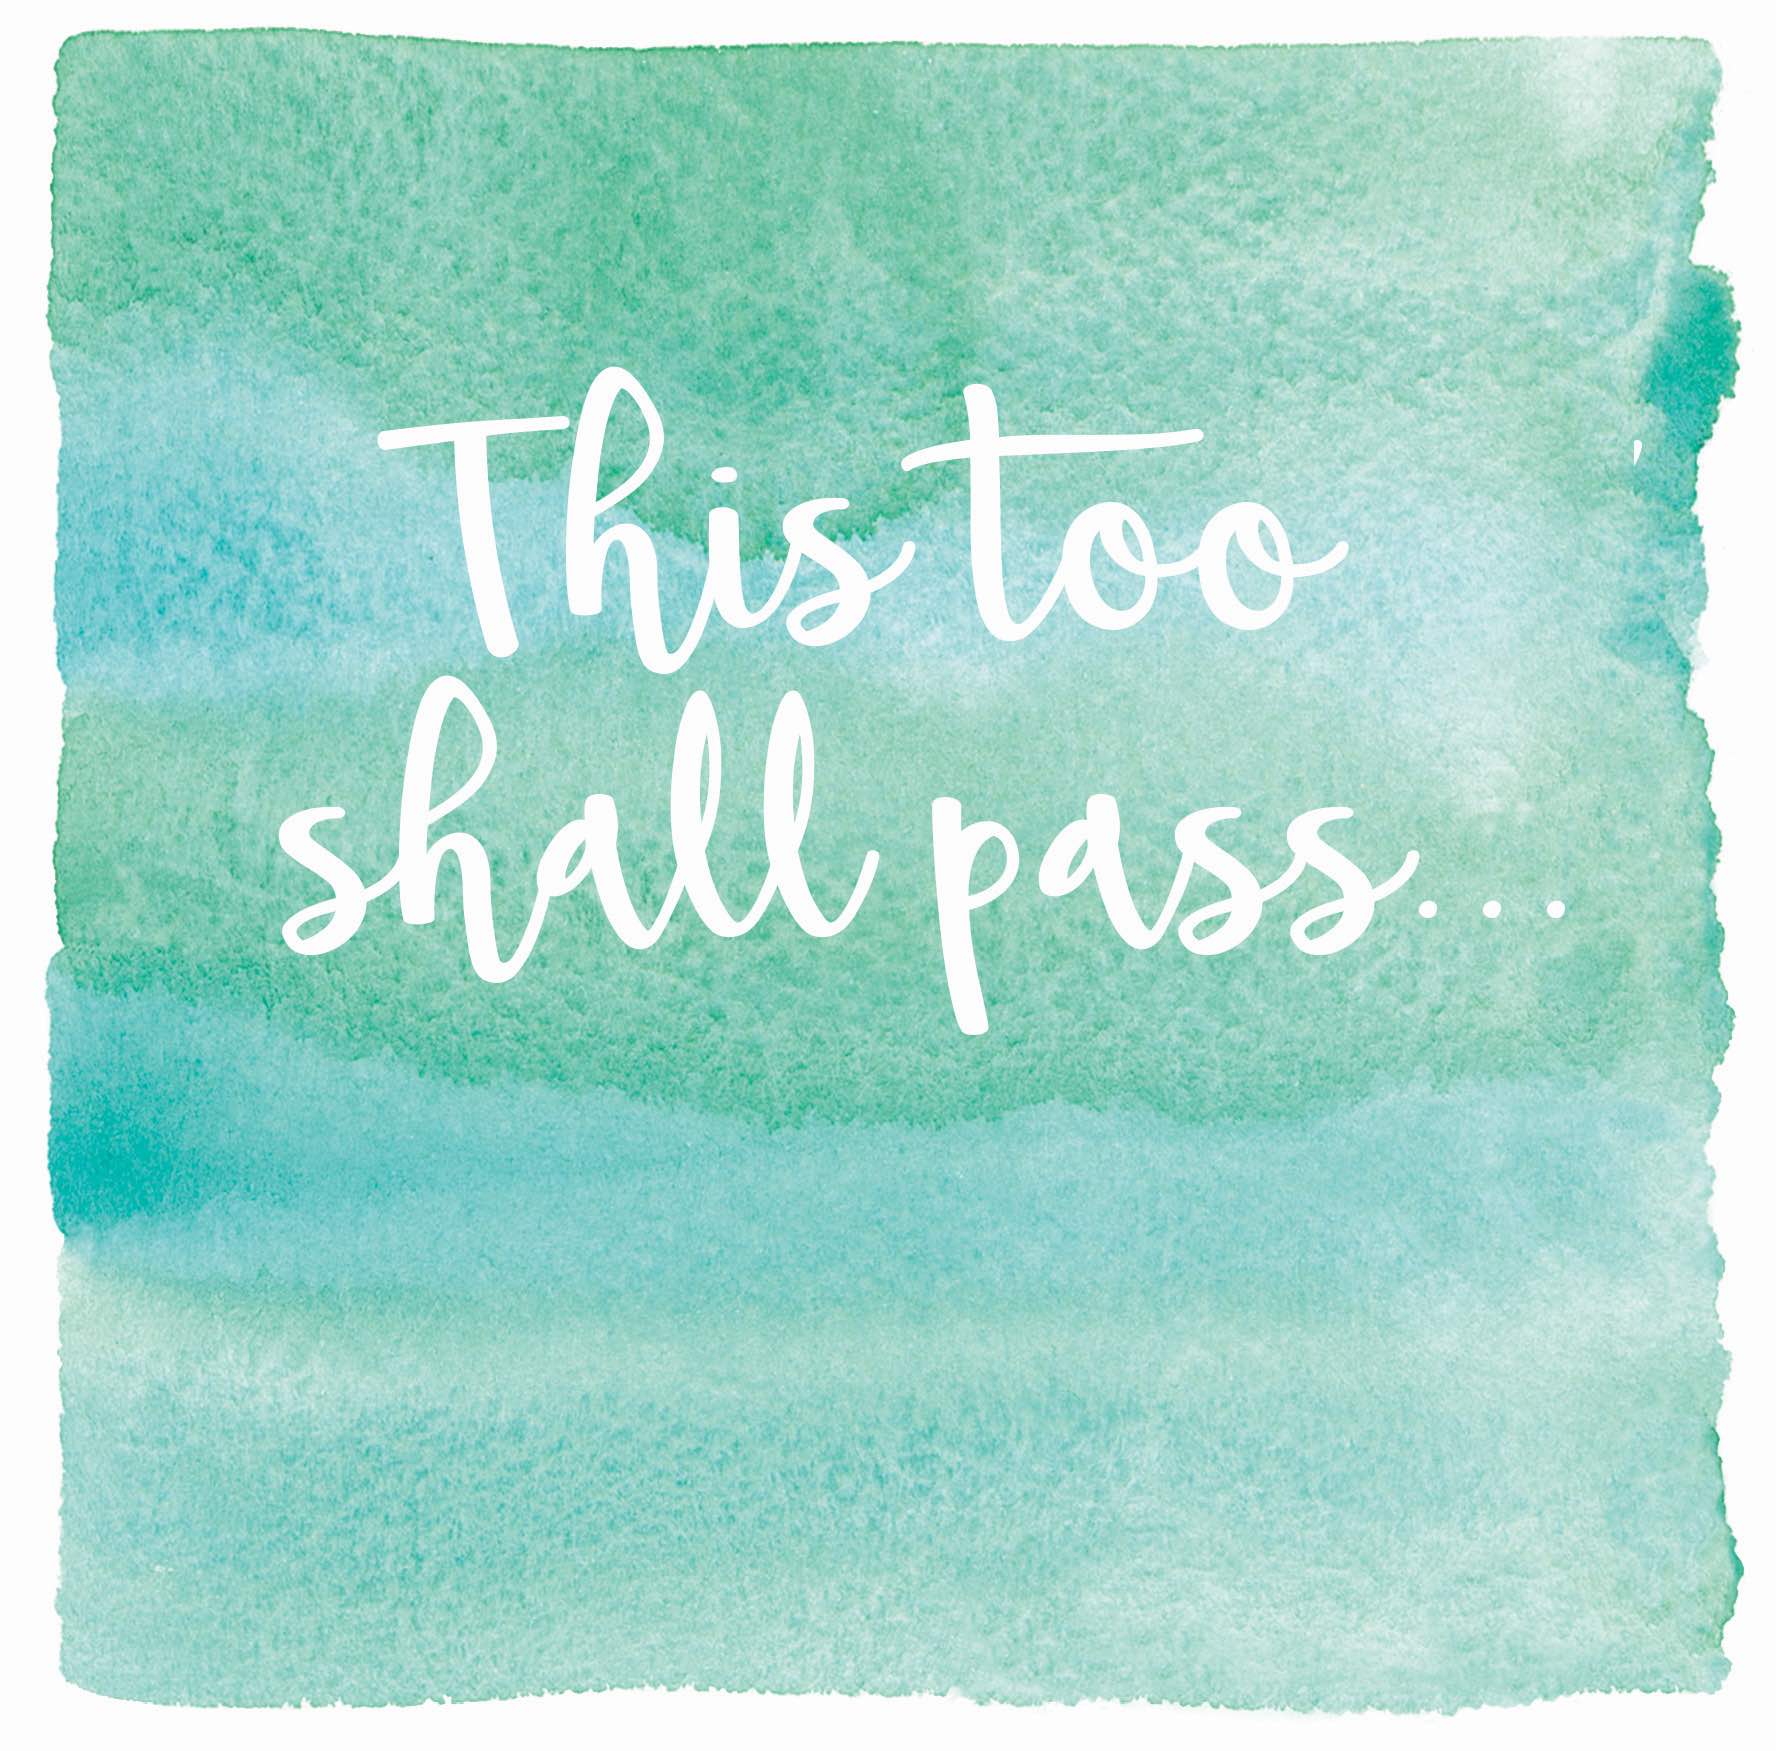 This too shall pass the arty penguin Ceinwen Campbell